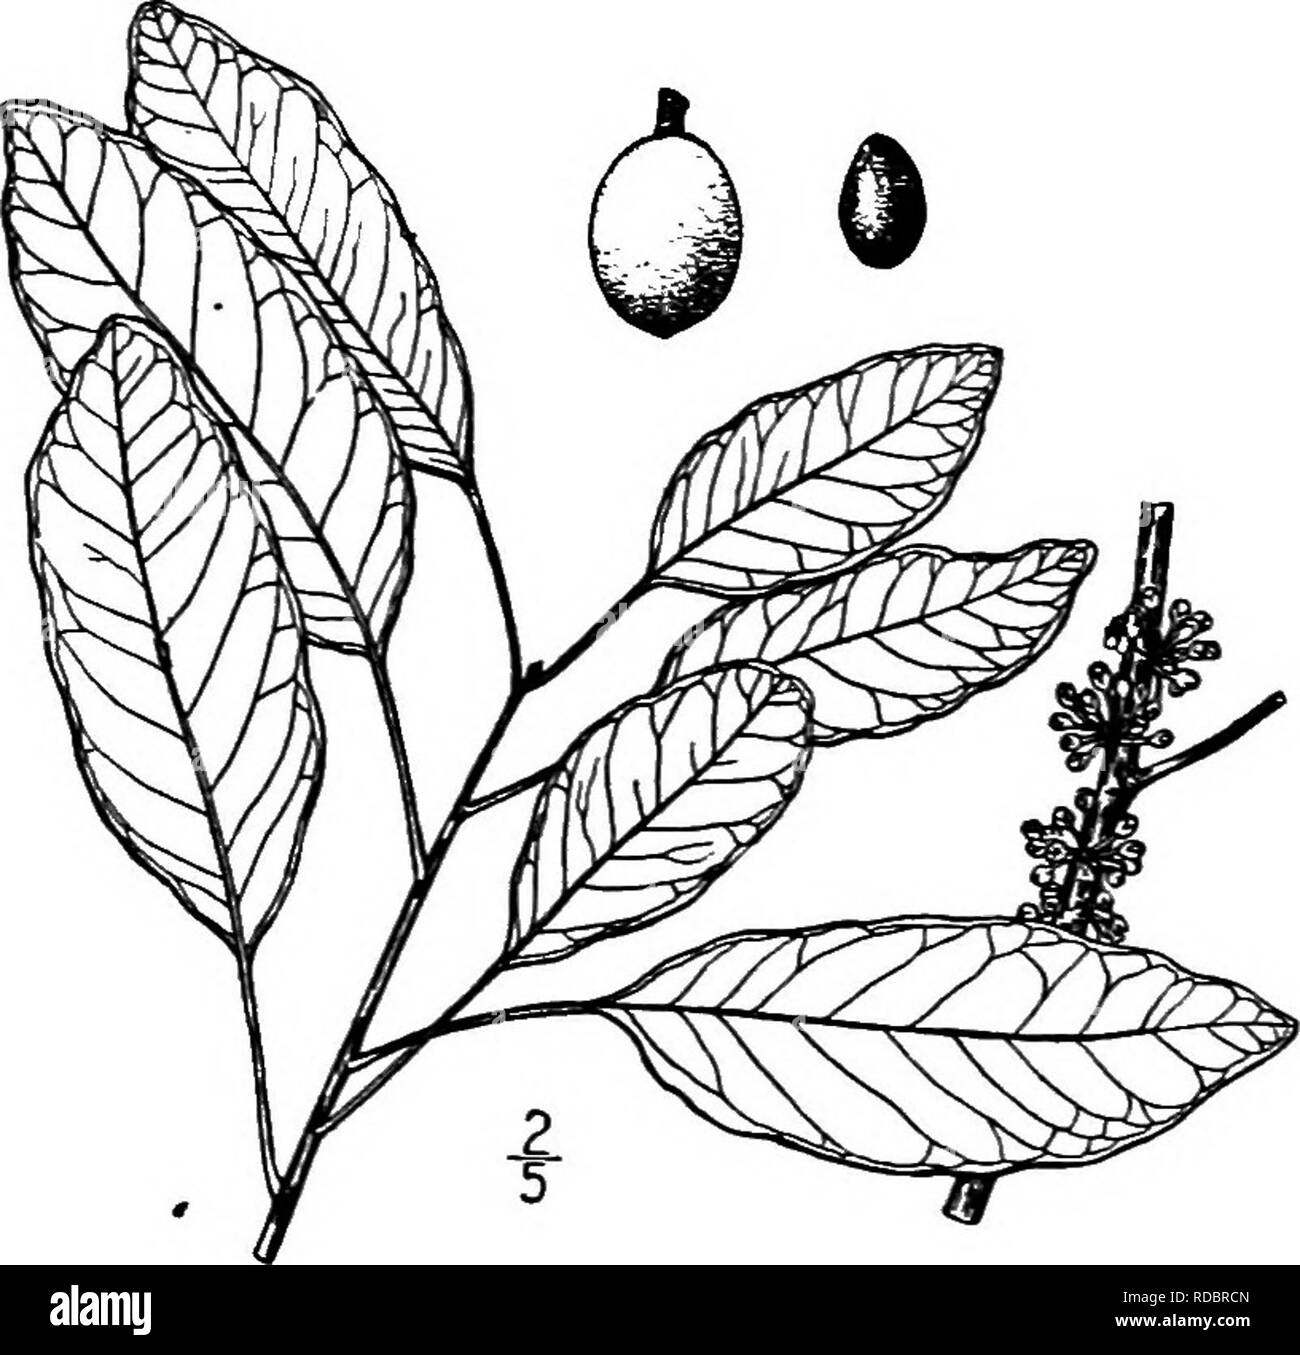 . North American trees : being descriptions and illustrations of the trees growing independently of cultivation in North America, north of Mexico and the West Indies . Trees. 774 Mastic The name is Greek, in reference to the golden pubescence on the under side of the leaves. II. MASTIC GENUS SIDEEOXyLON [DILLENIUS] LINN^US Species Sideroxylon foBtddissimnm Jacquin Sideroxylon mastichodendron Jacquin ^LSO called Wild olive, this is a large tree of rich hammocks in penin- sular Florida and the Keys, and is widely distributed in the Bahamas and other West Indies. Its maximvmi height is about 25 m Stock Photo